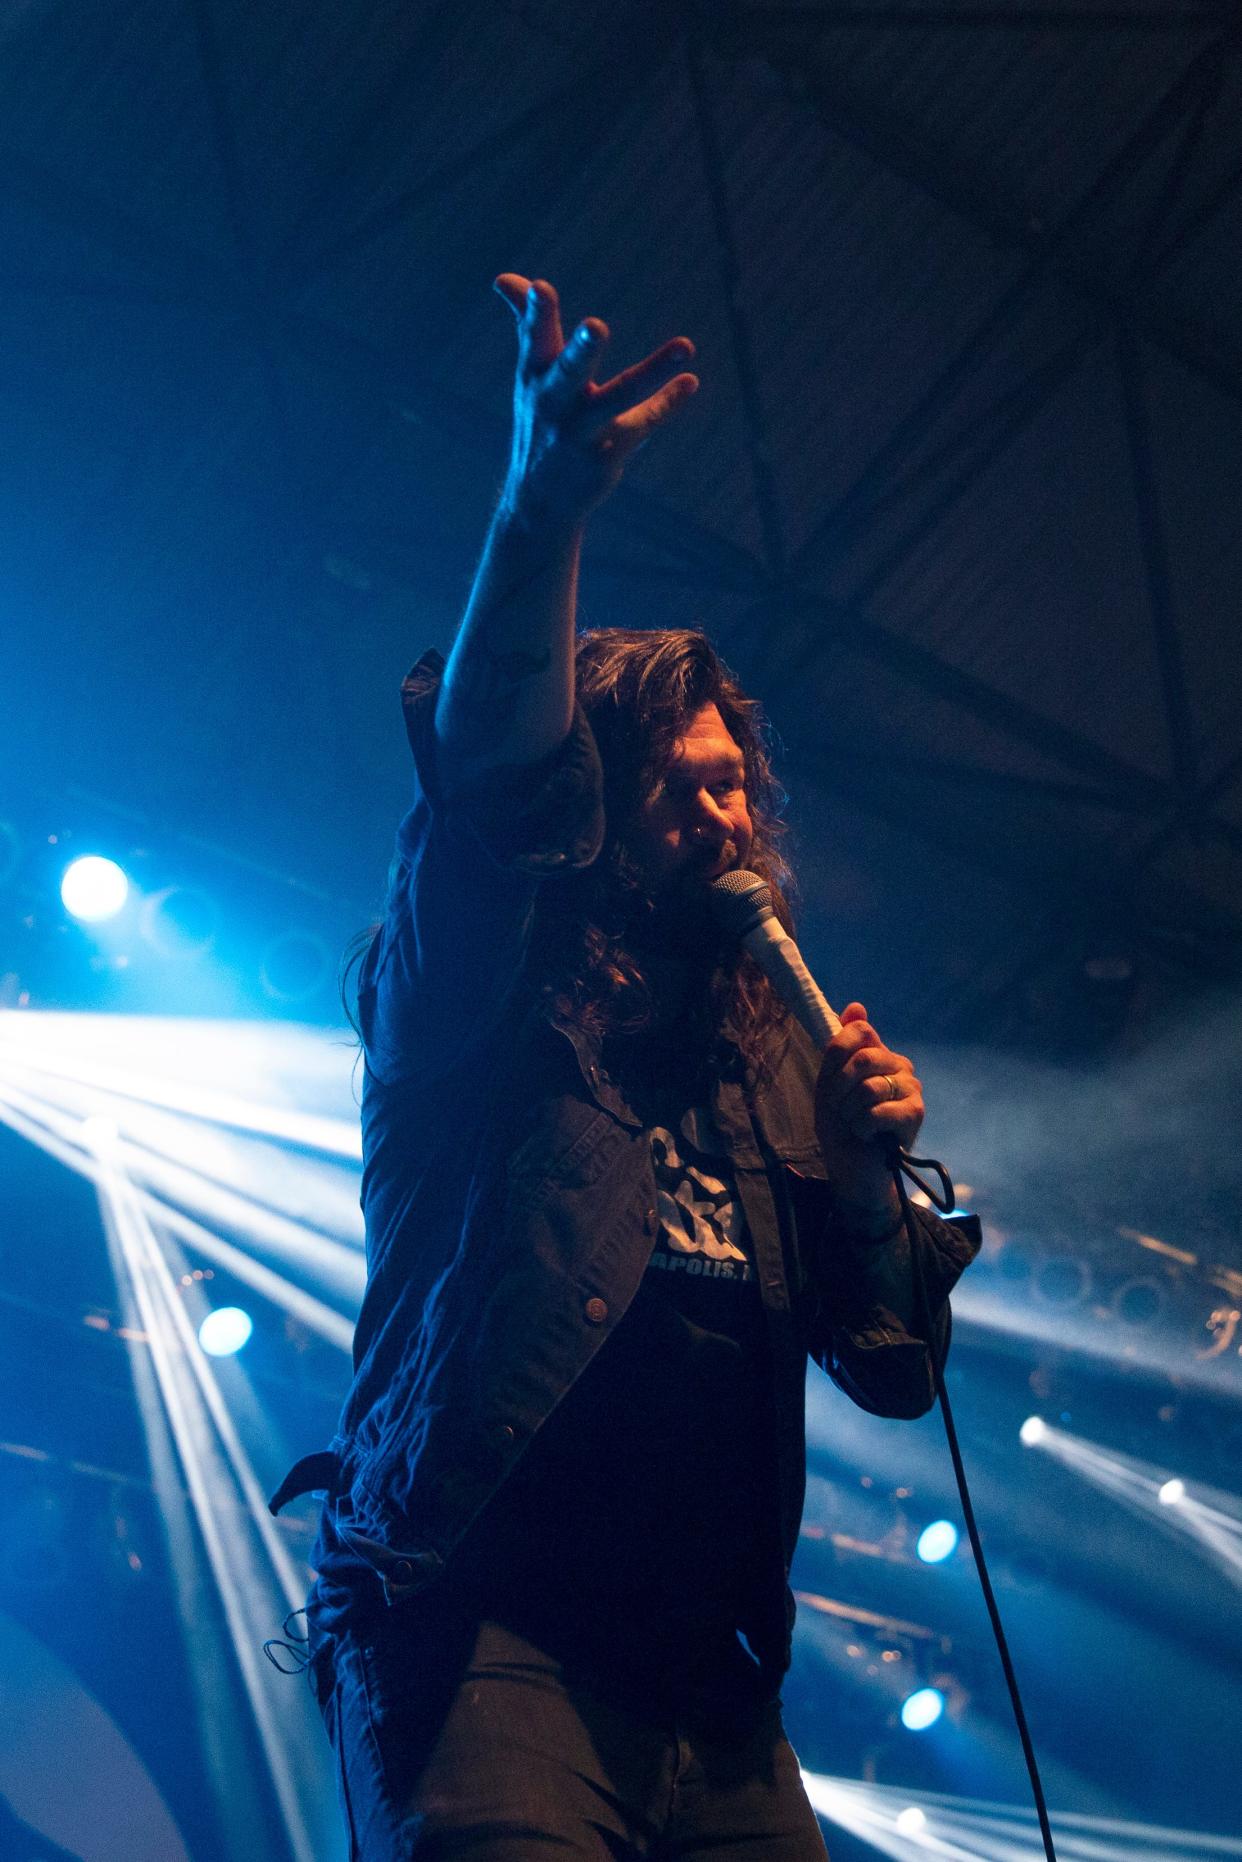 Taking Back Sunday, touring this summer with Third Eye Blind, might also be Summerfest-bound.